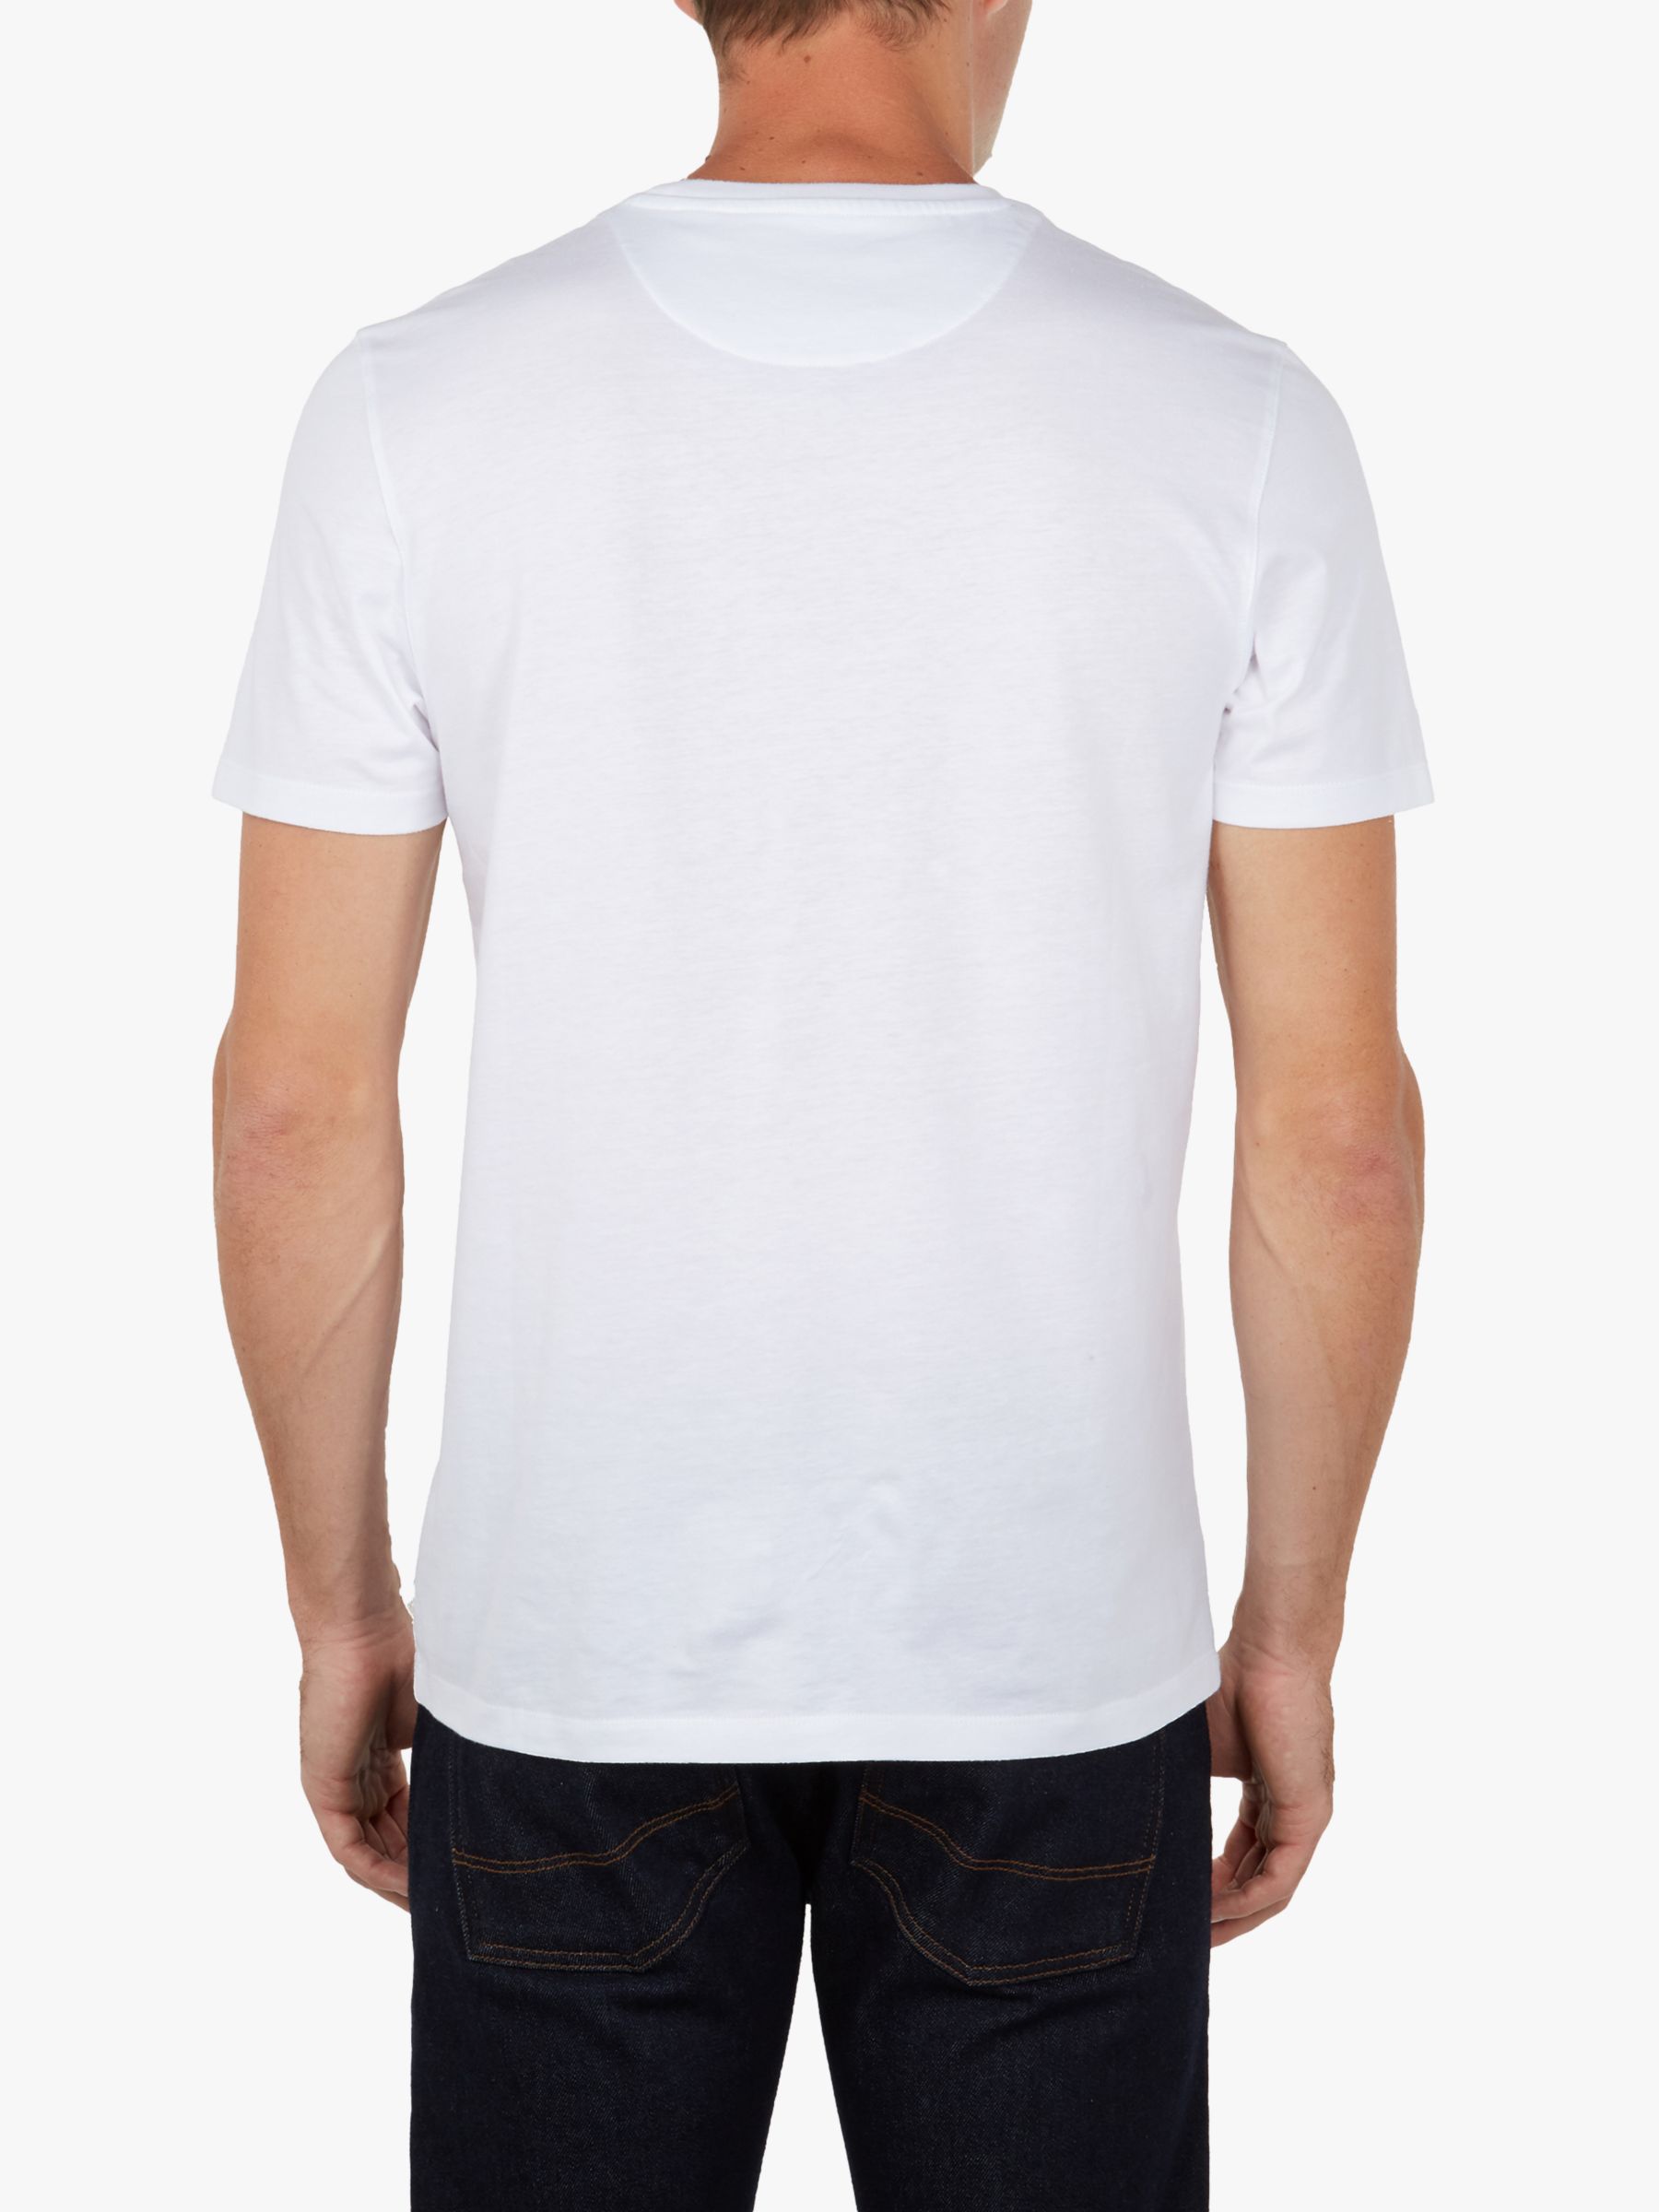 Ted Baker Deelo Graphic T-Shirt, White